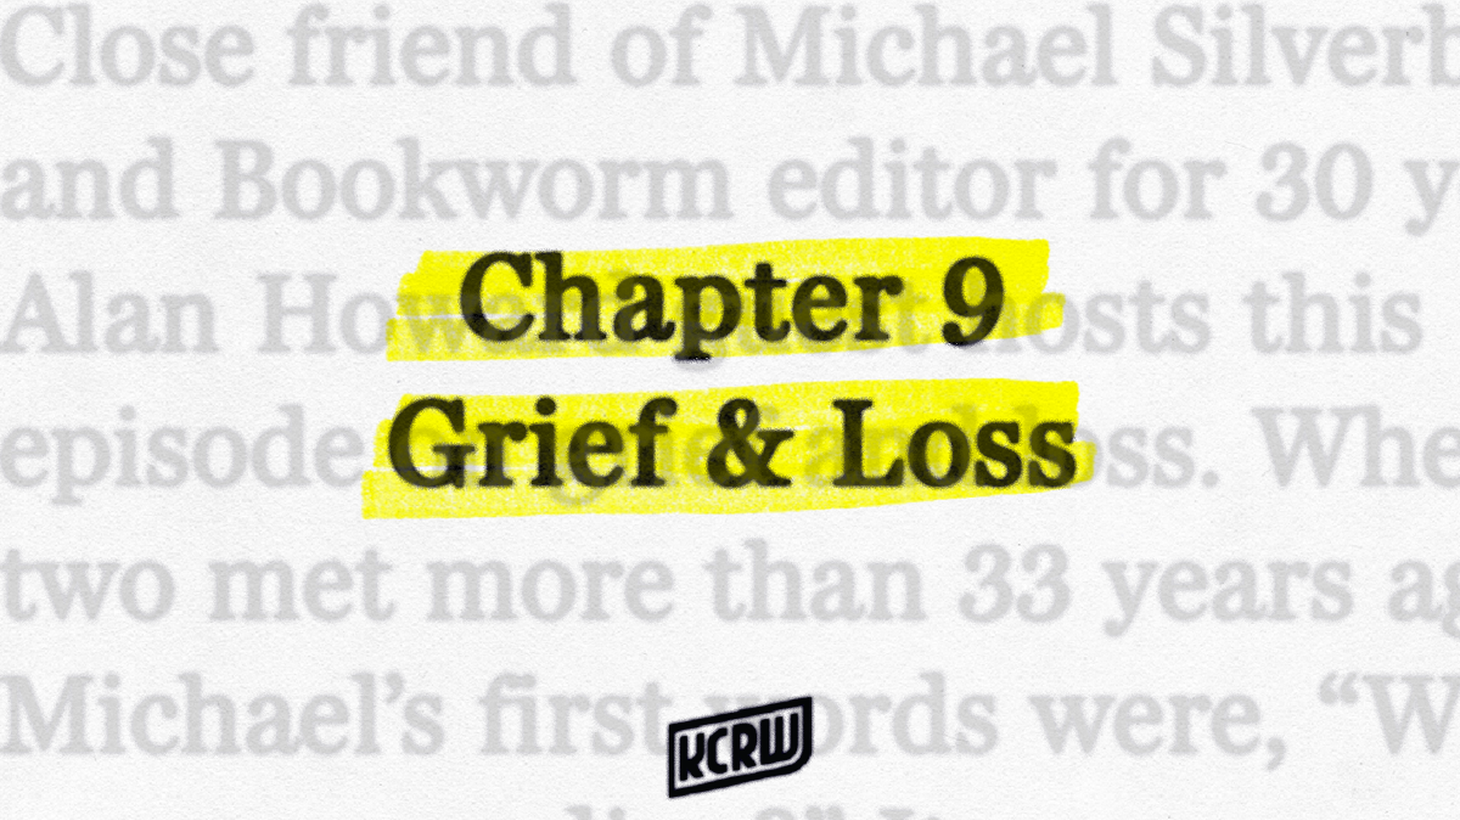 Close friend of Michael Silverblatt’s and Bookworm editor for 30 years, Alan Howard guest hosts this episode on grief and loss. When the two met more than 33 years ago, Michael’s first words were, “What are you reading?”